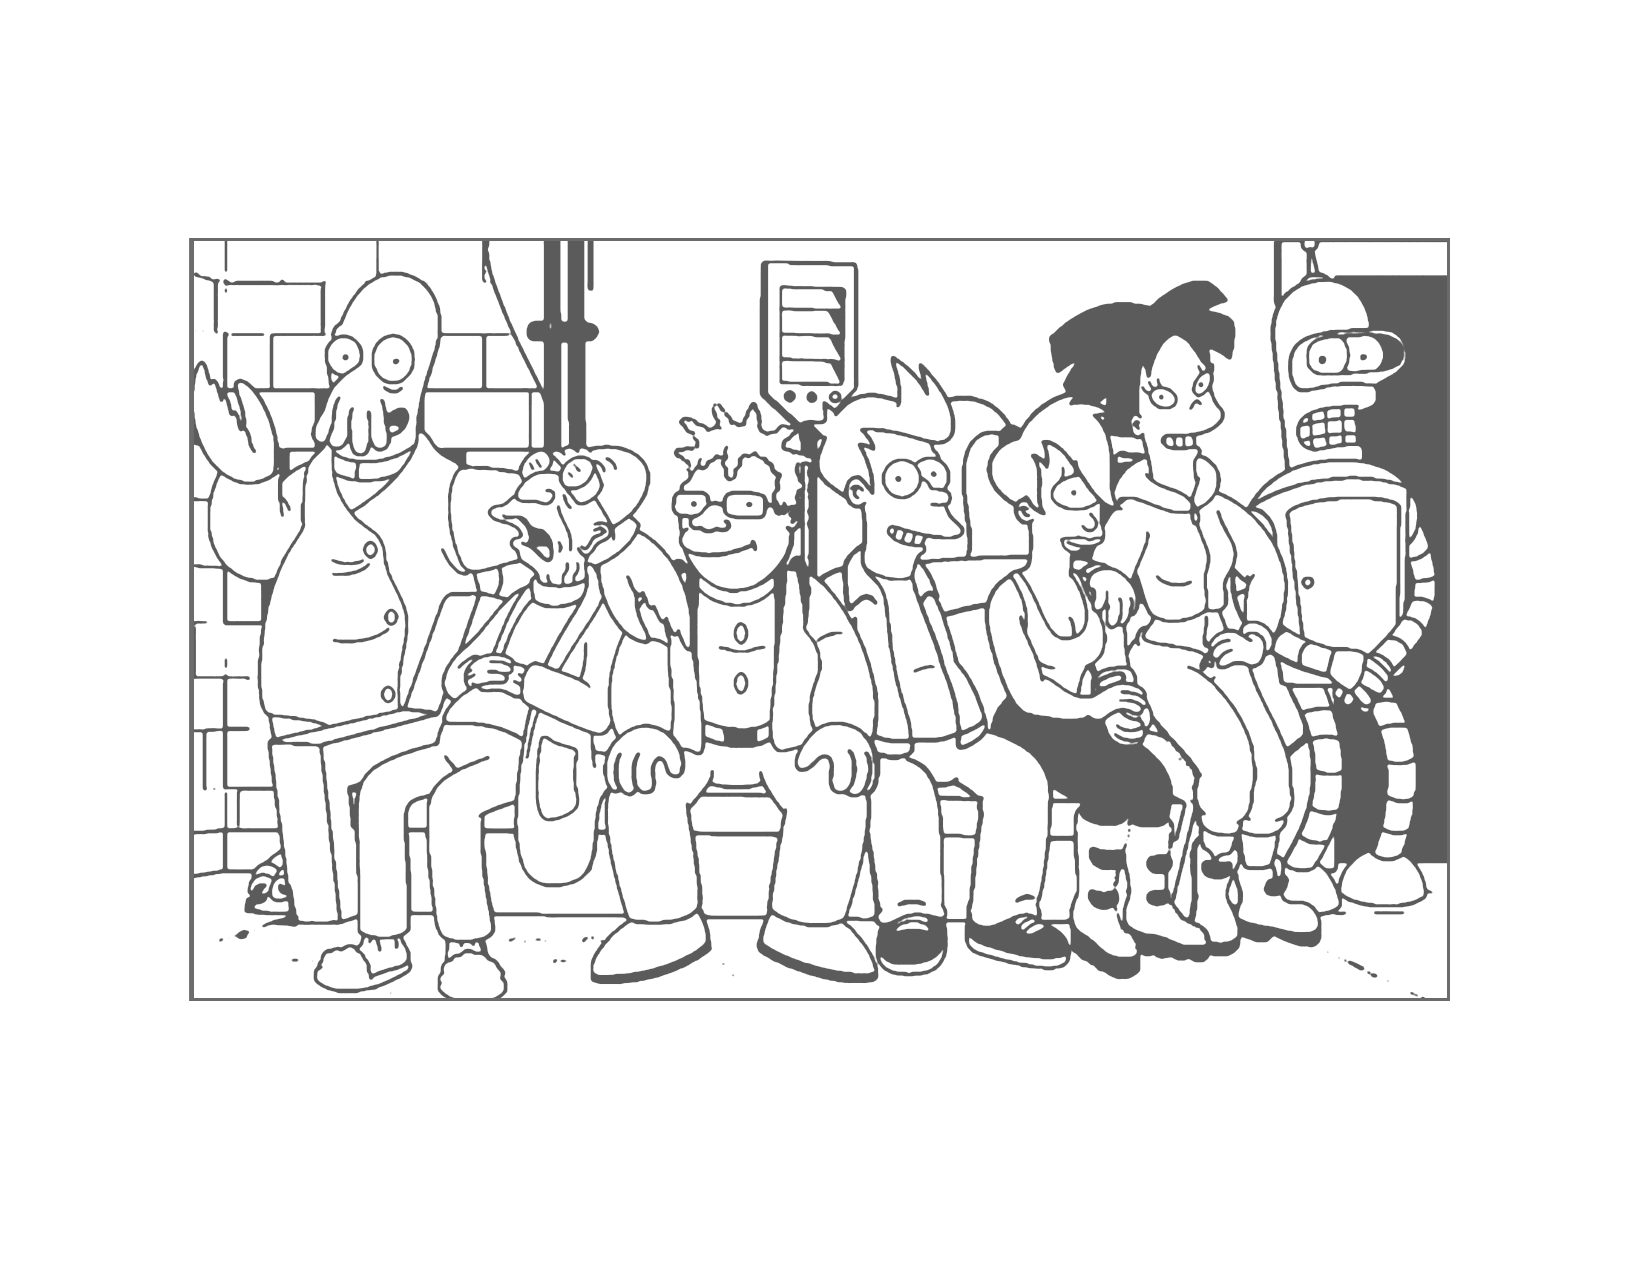 Futurama Traceable Coloring Page